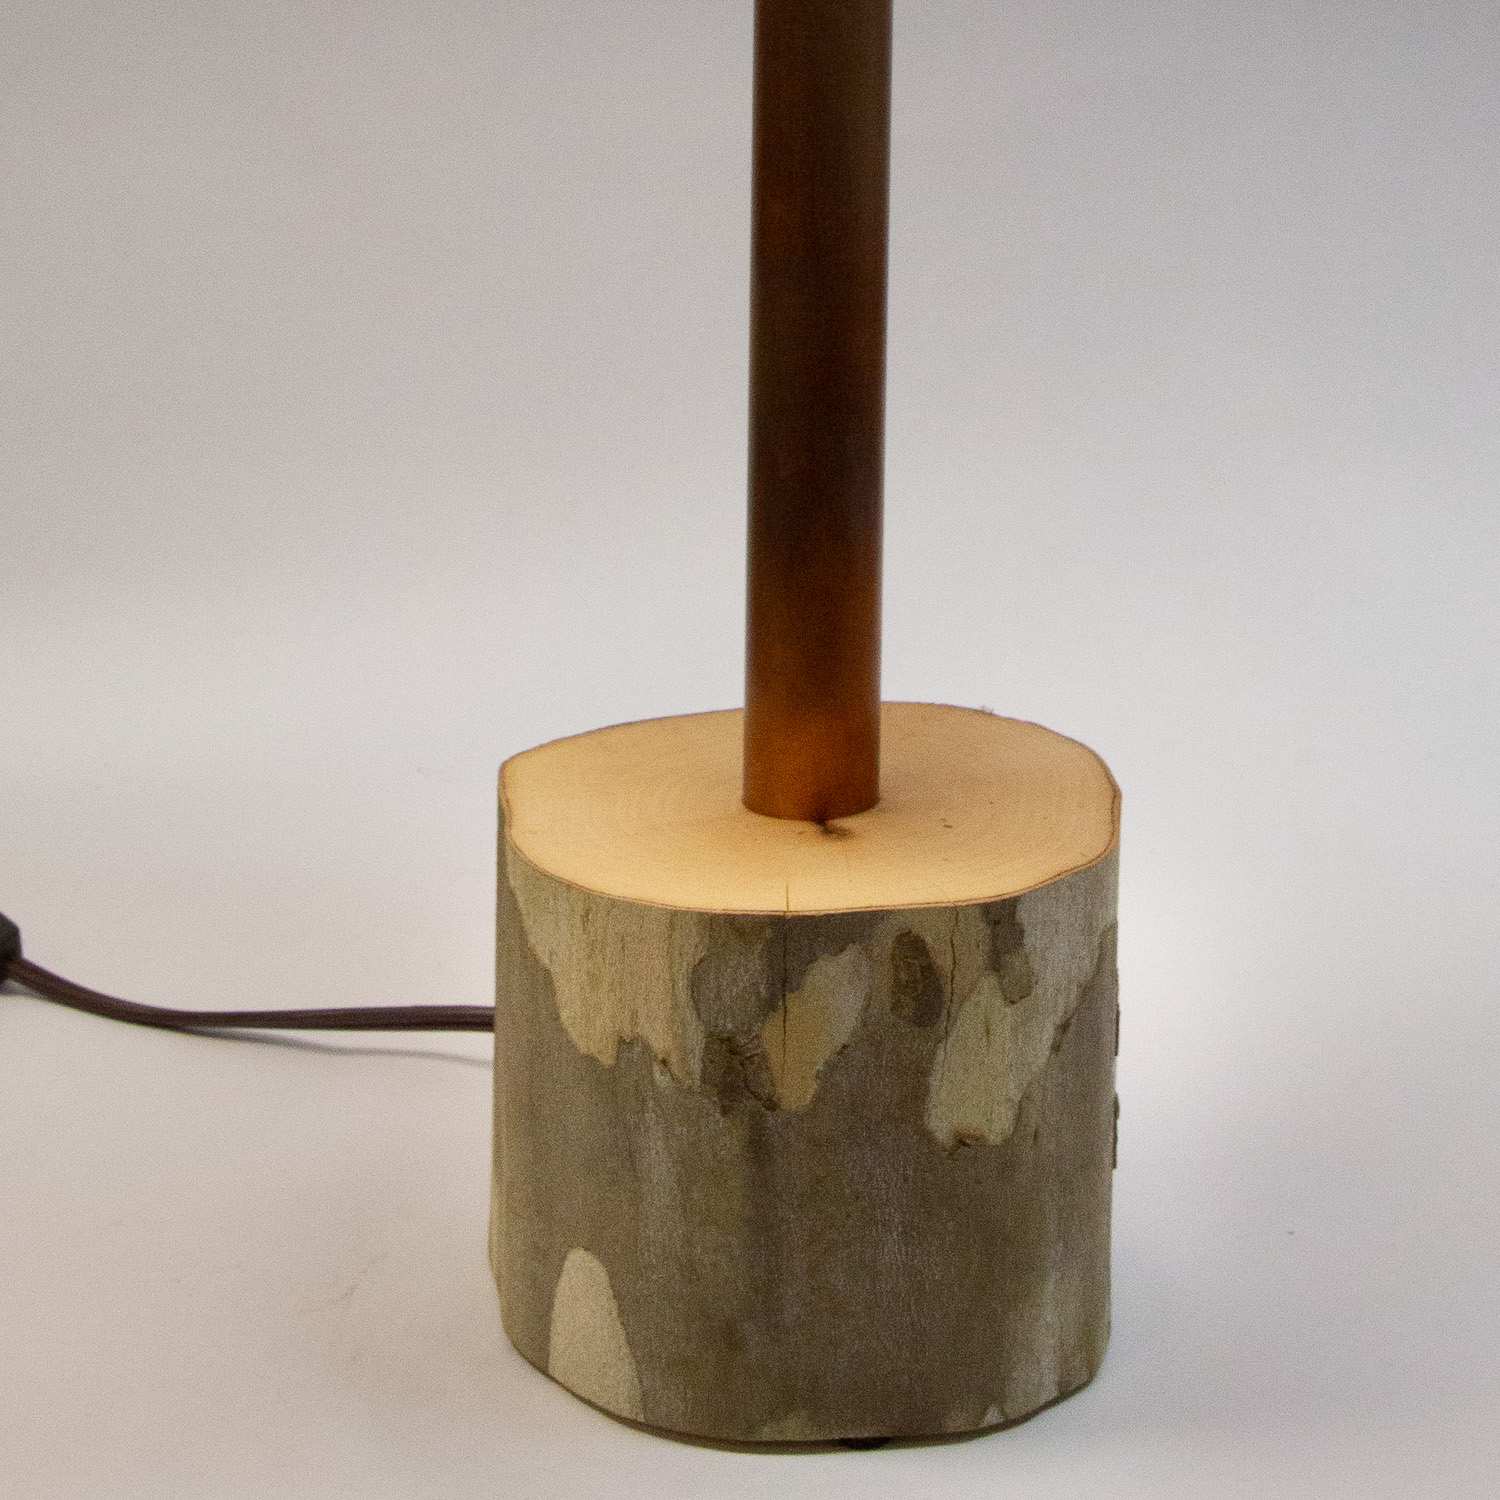 : Table lamp with sycamore log base and photo silk shade with image of sycamore bark.